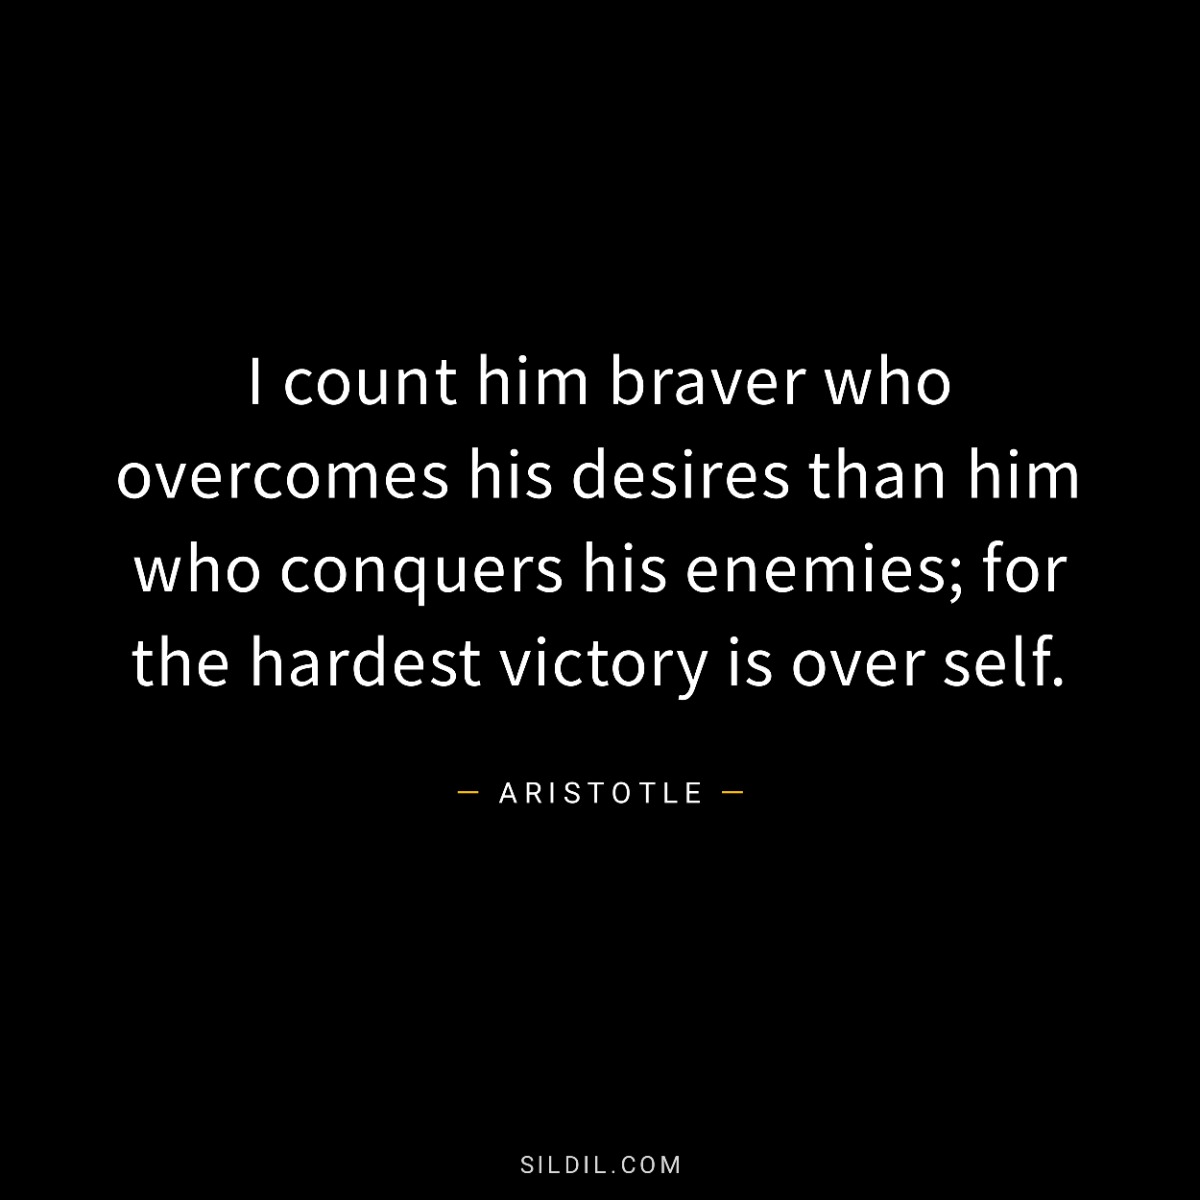 I count him braver who overcomes his desires than him who conquers his enemies; for the hardest victory is over self.